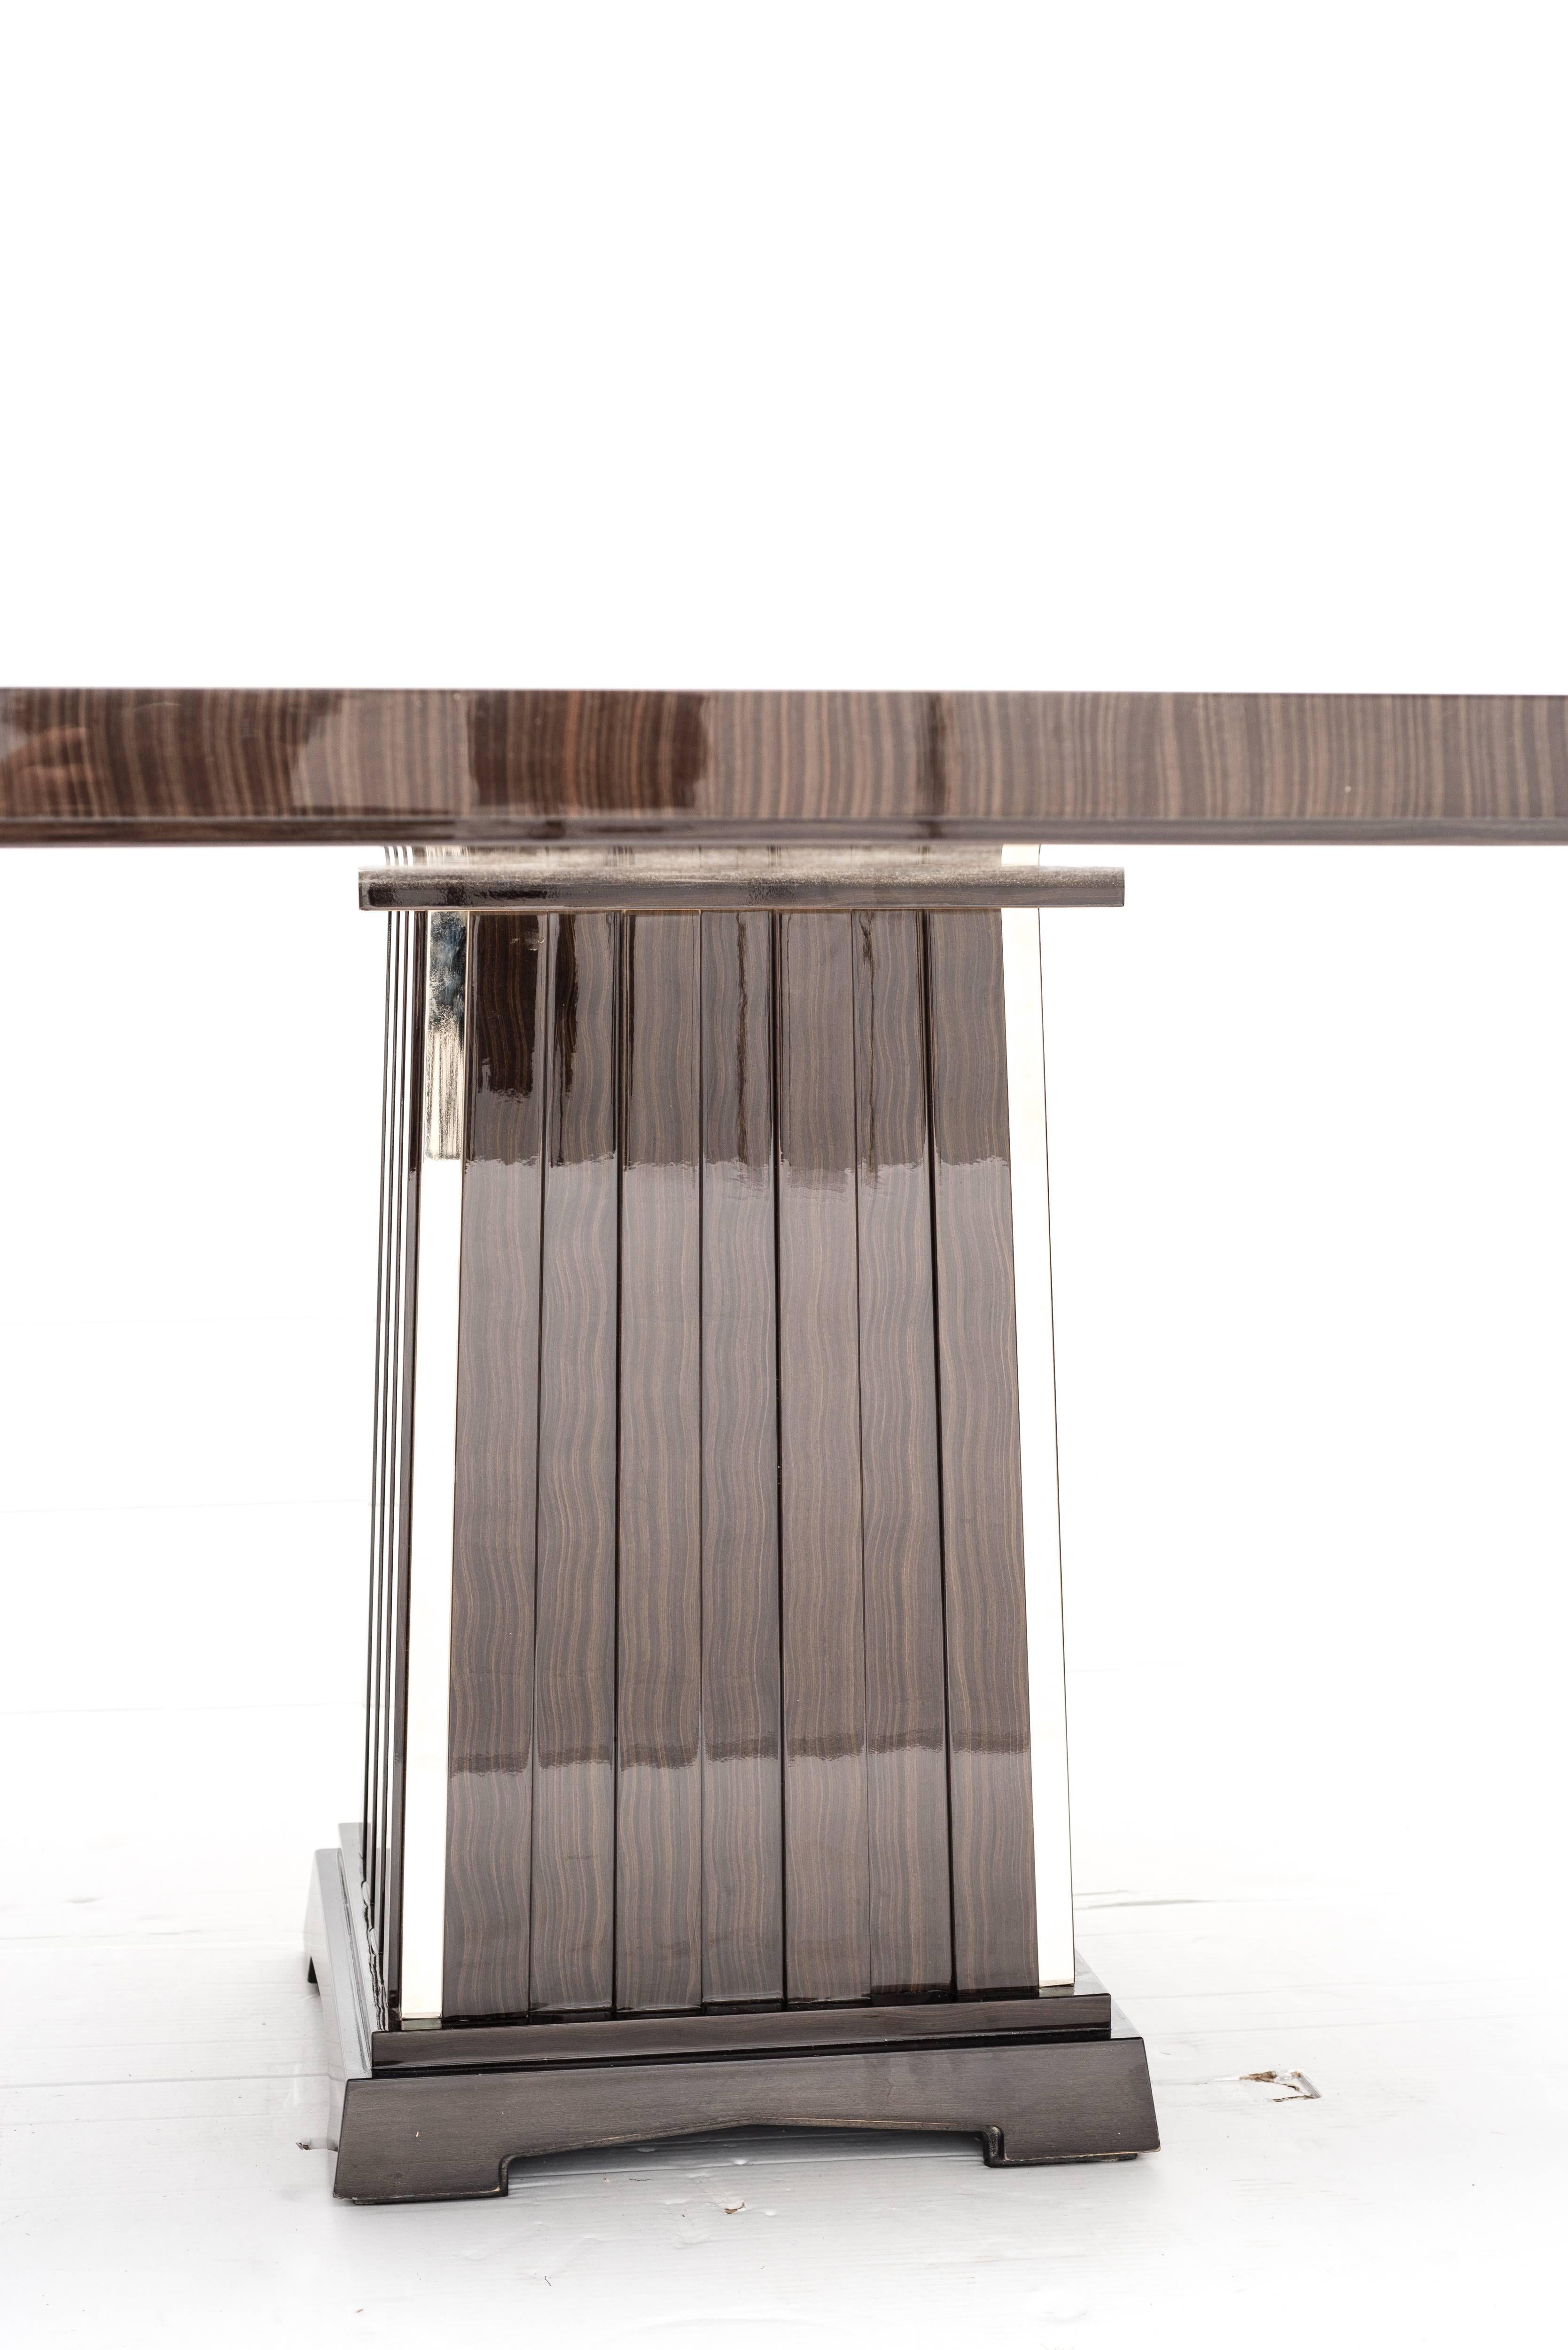 Art Deco Fine Bespoke Dining Room Table, Veneer Wood Top and Base with Chrome Inserts For Sale